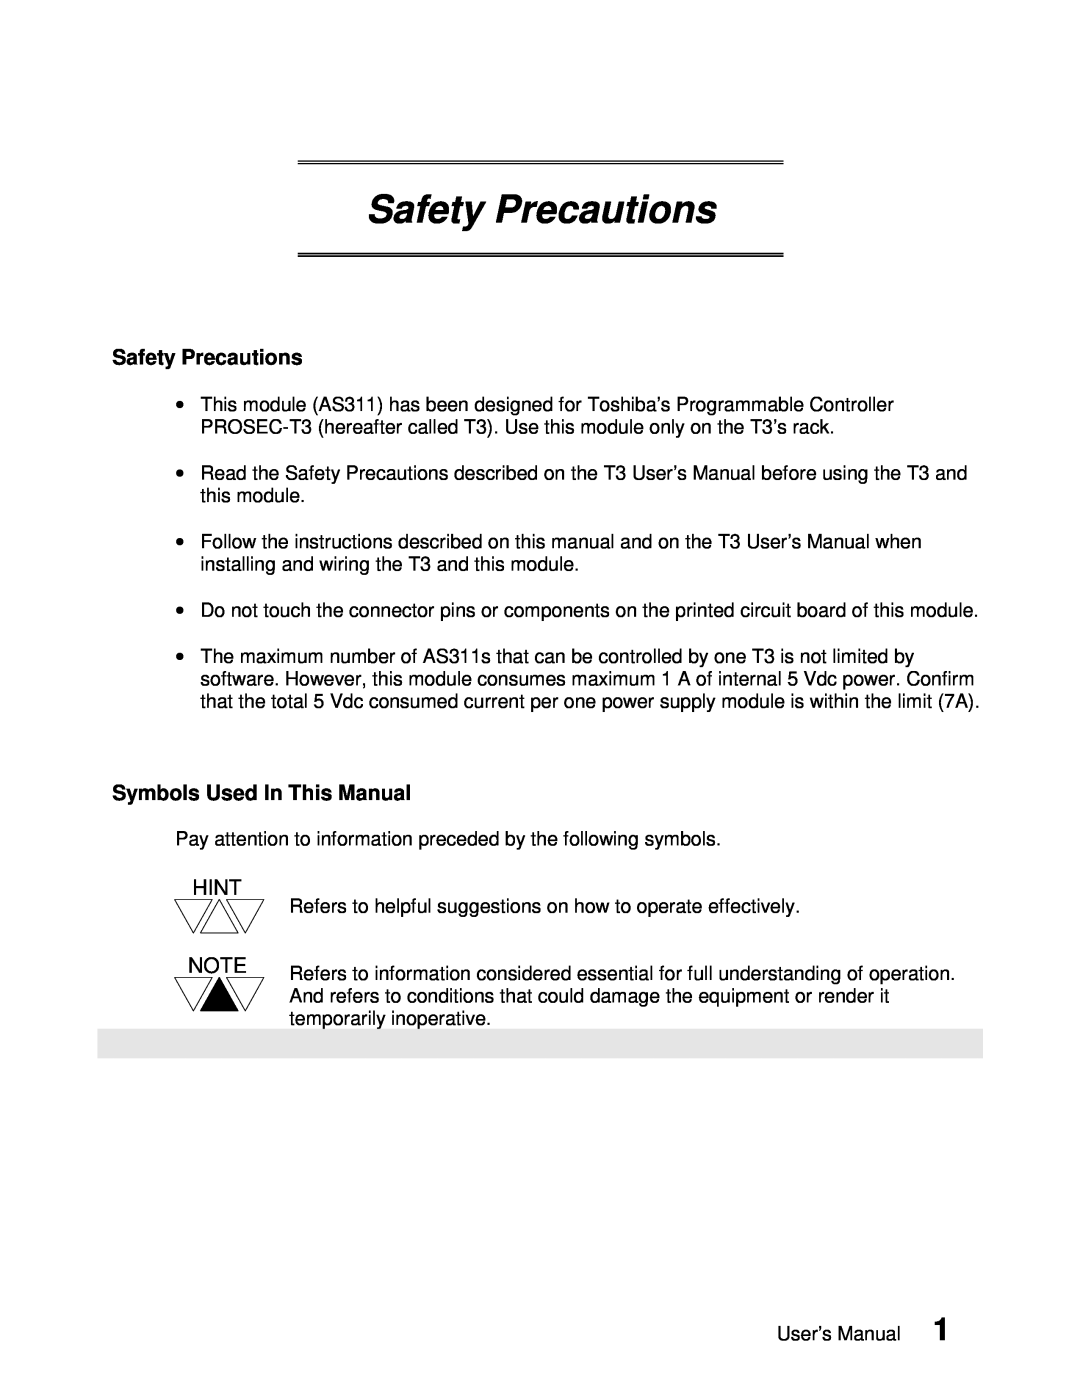 Toshiba AS311 user manual Safety Precautions, Symbols Used In This Manual, Hint 